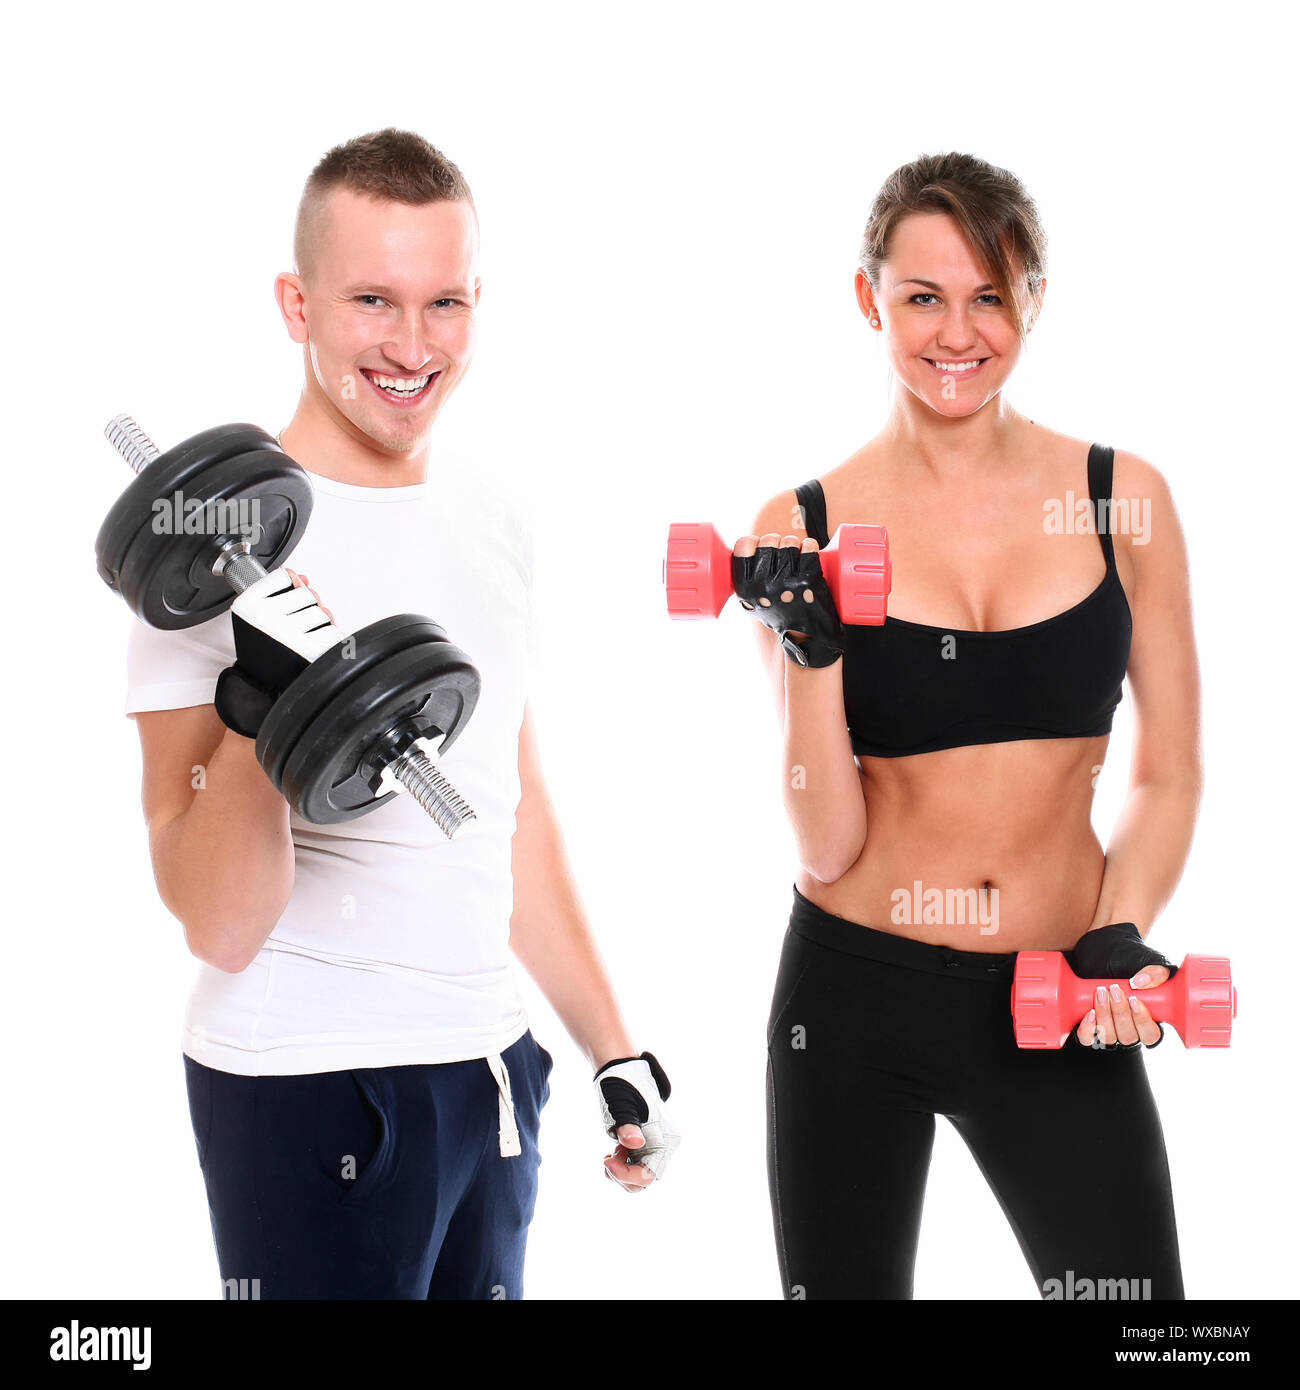 Sport Women Doing Fitness With Dumbbell Biceps Curl To Shoulder Press  Exercise In 3 Steps Fitness With Workout Equipment Of Gym Stock  Illustration - Download Image Now - iStock